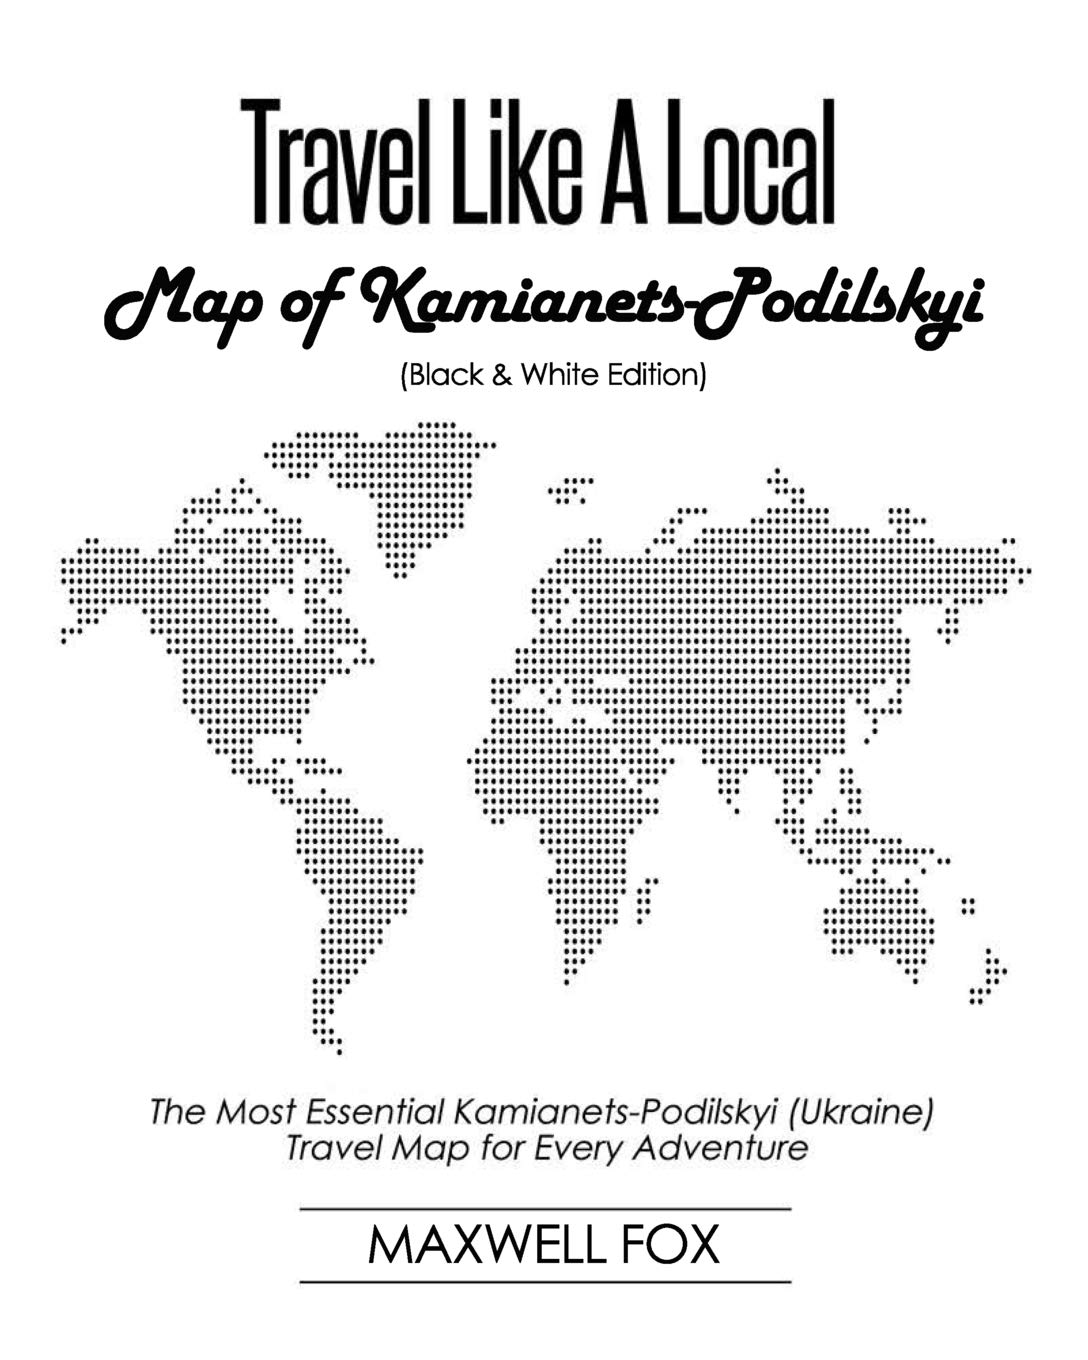 Travel Like a Local - Map of Kamianets-Podilskyi: The Most Essential Kamianets-Podilskyi (Ukraine) Travel Map for Every Adventure